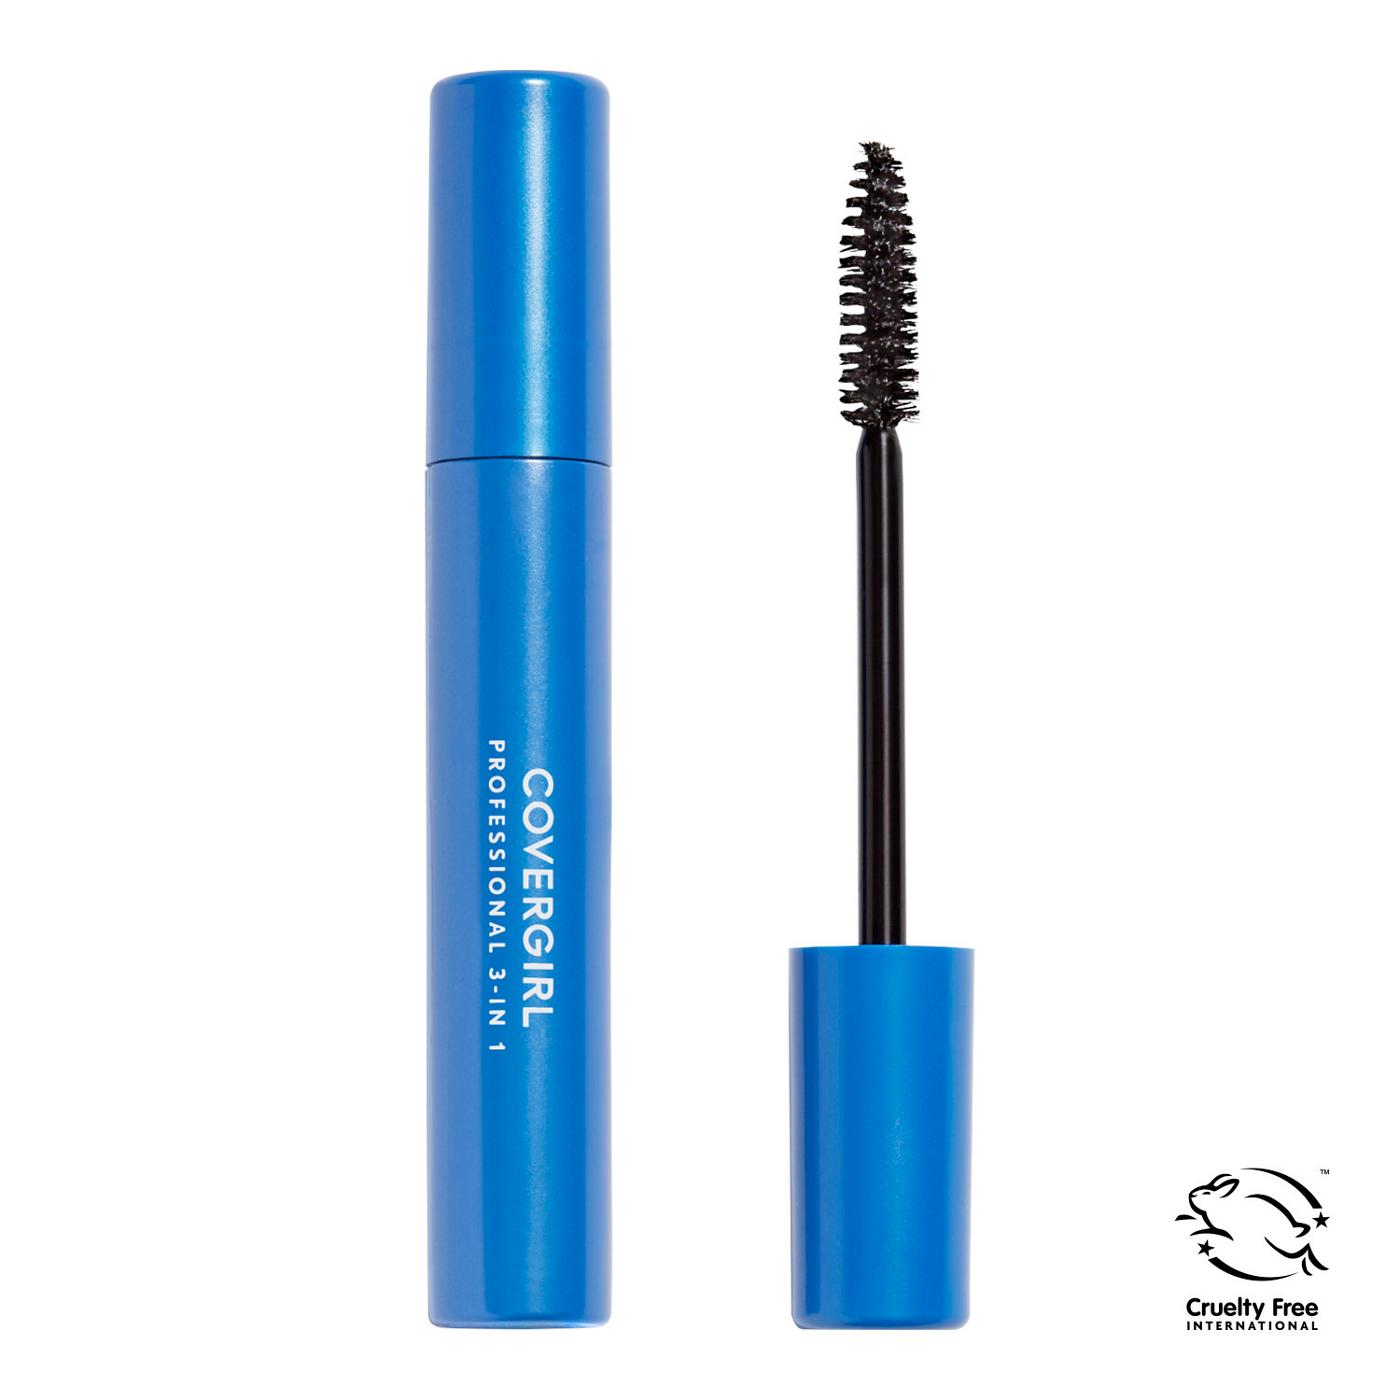 Covergirl Professional 3-in-1 Straight Brush Mascara 200 Very Black; image 3 of 5